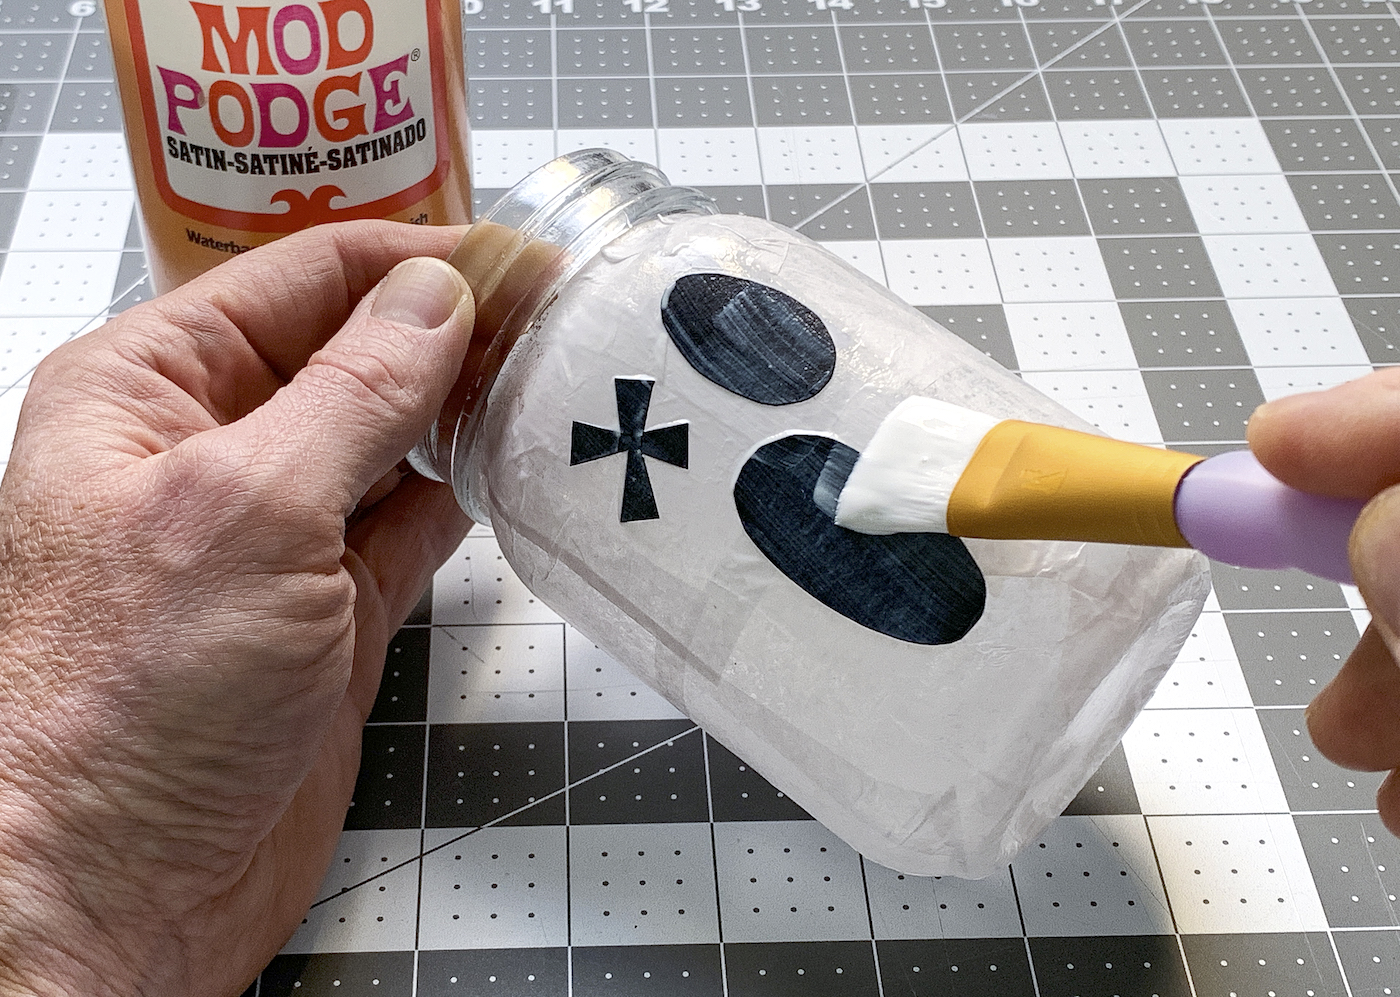 Adding Mod Podge to the top of a ghost mason jar